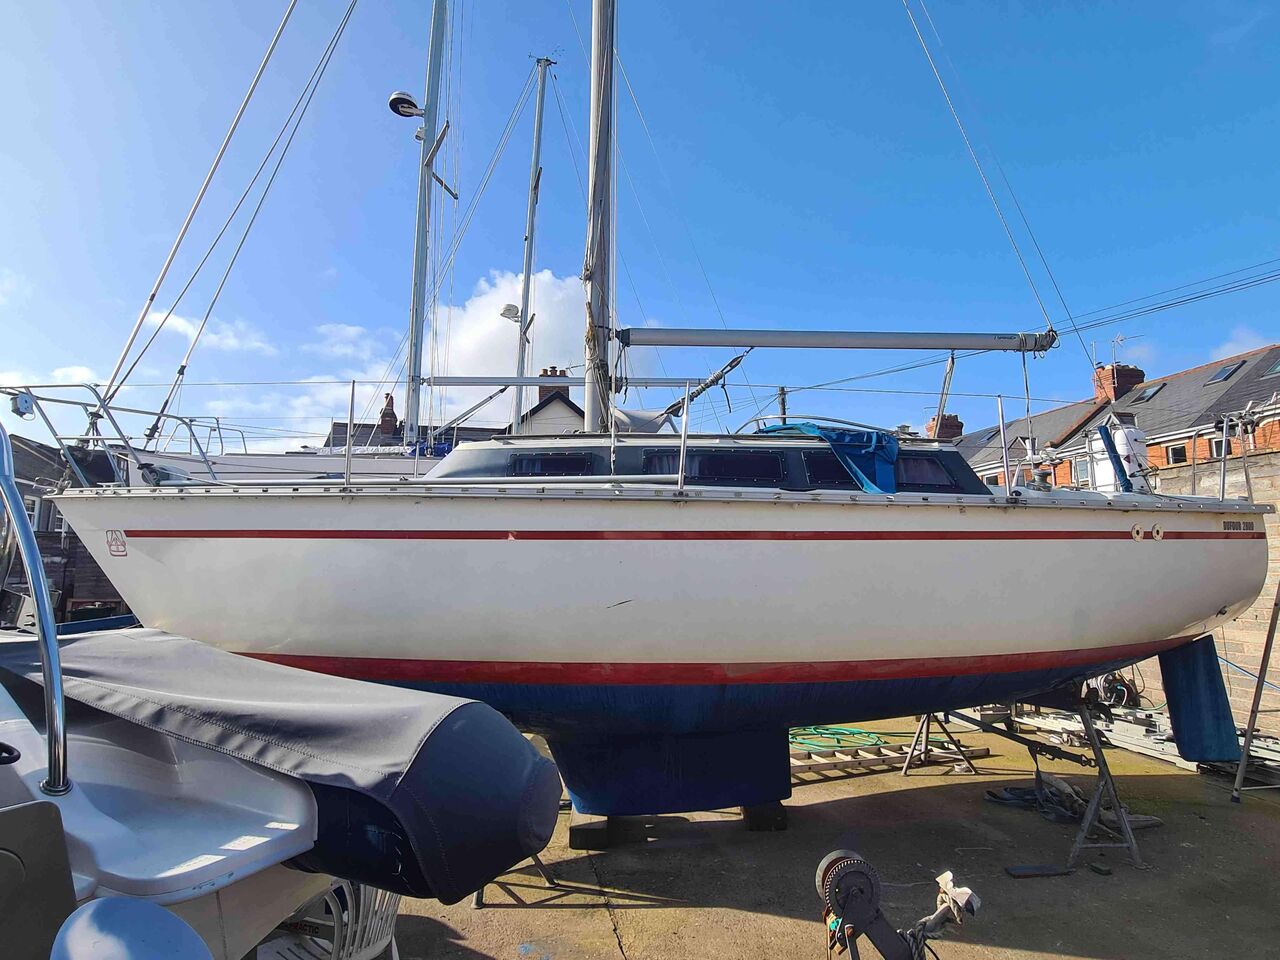 Dufour 2800 Lifting KEEL (sailboat) for sale